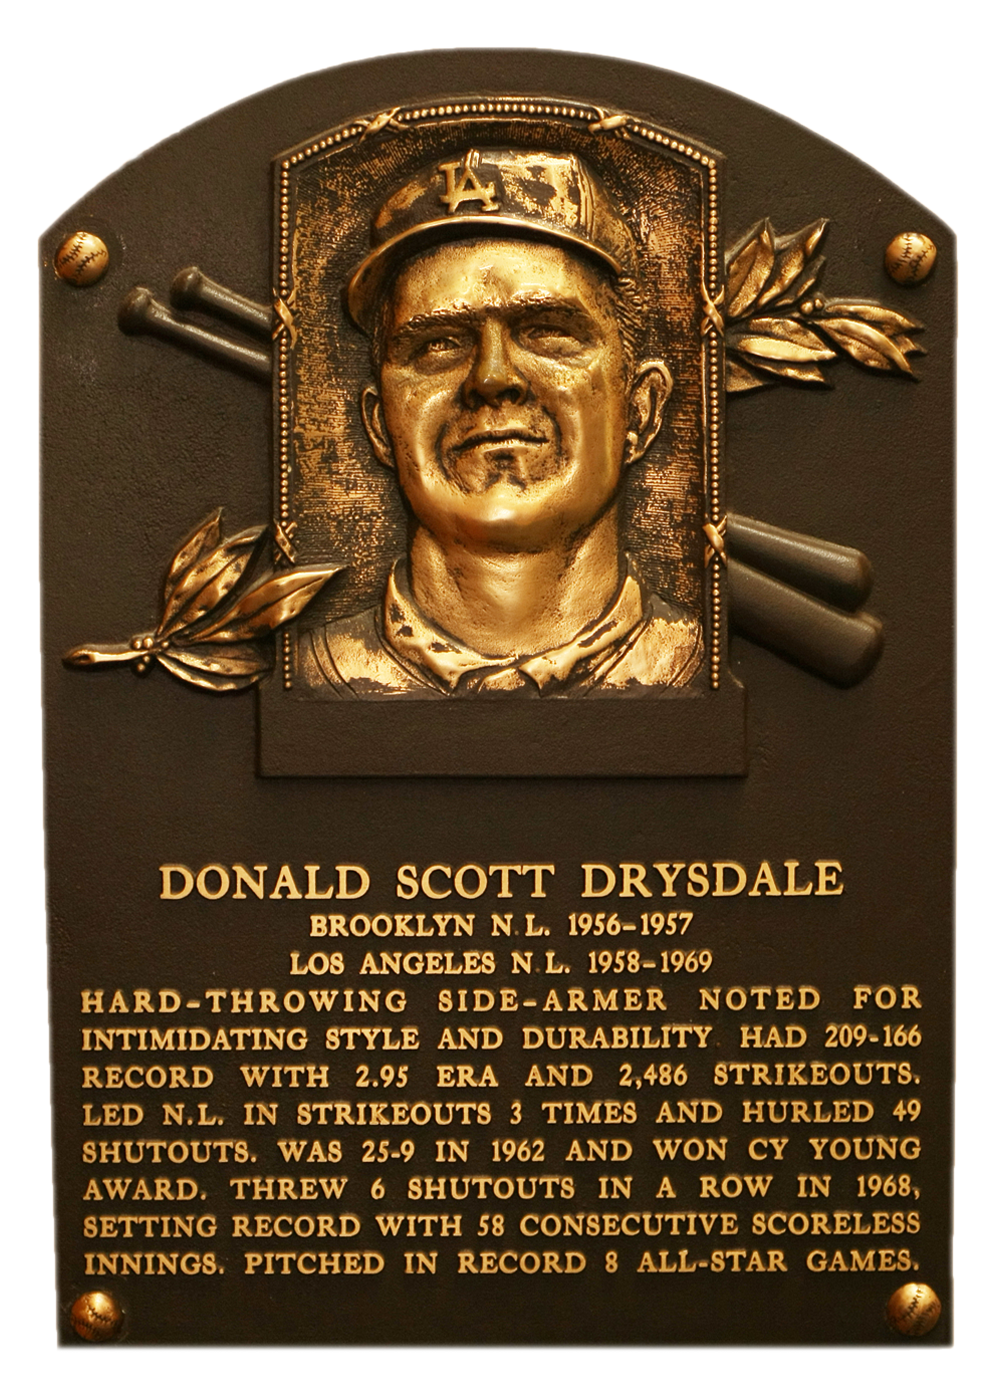 Don Drysdale Hall of Fame plaque